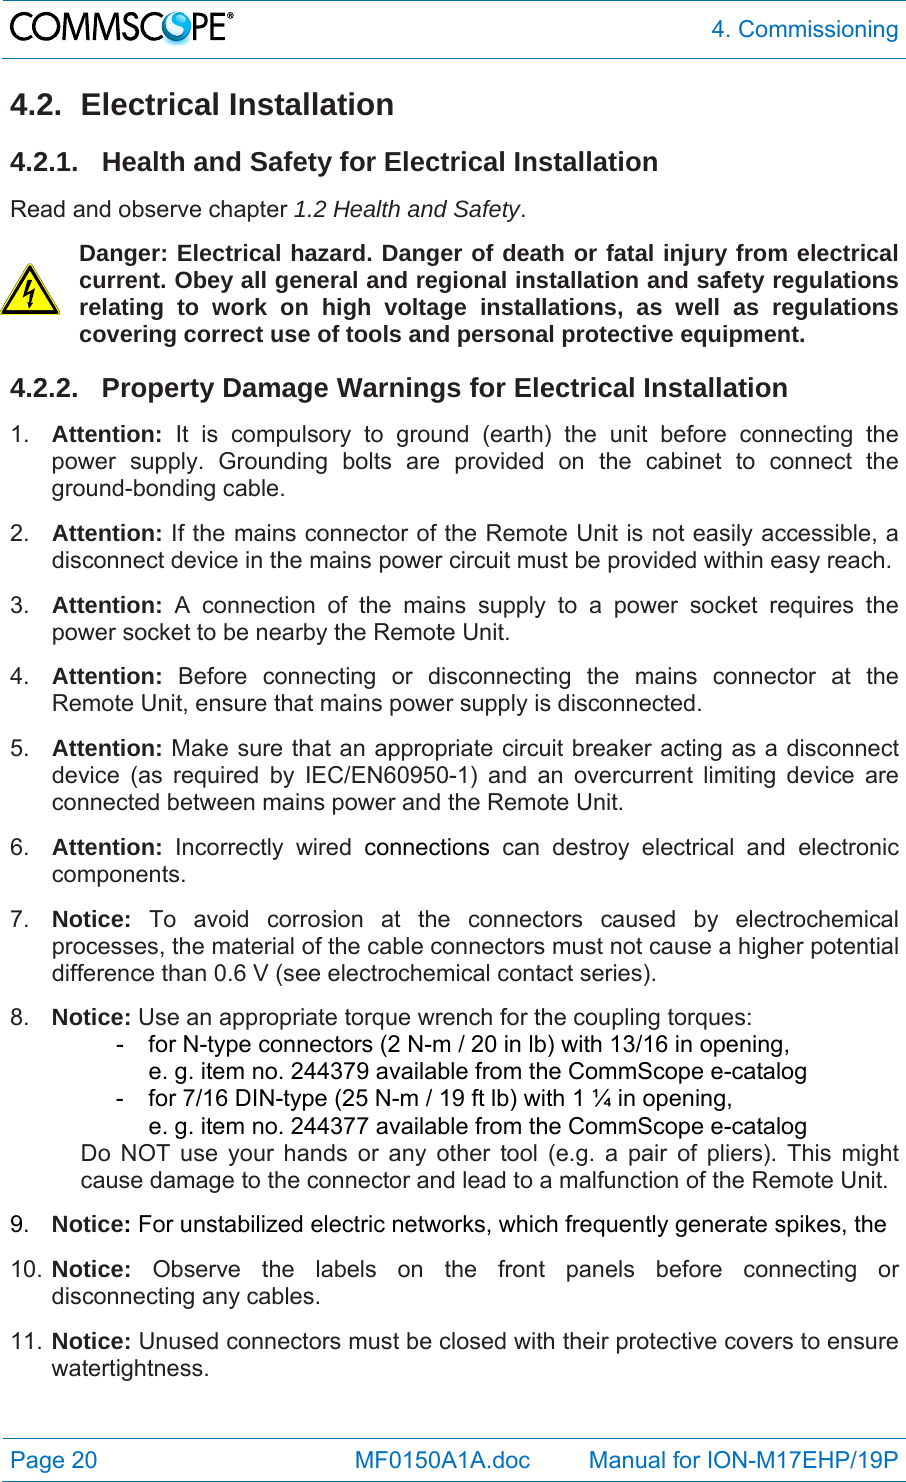  4. Commissioning Page 20            MF0150A1A.doc         Manual for ION-M17EHP/19P 4.2. Electrical Installation 4.2.1.  Health and Safety for Electrical Installation Read and observe chapter 1.2 Health and Safety. Danger: Electrical hazard. Danger of death or fatal injury from electrical current. Obey all general and regional installation and safety regulations relating to work on high voltage installations, as well as regulations covering correct use of tools and personal protective equipment. 4.2.2.  Property Damage Warnings for Electrical Installation 1.  Attention: It is compulsory to ground (earth) the unit before connecting the power supply. Grounding bolts are provided on the cabinet to connect the ground-bonding cable.  2.  Attention: If the mains connector of the Remote Unit is not easily accessible, a disconnect device in the mains power circuit must be provided within easy reach. 3.  Attention: A connection of the mains supply to a power socket requires the power socket to be nearby the Remote Unit. 4.  Attention:  Before connecting or disconnecting the mains connector at the Remote Unit, ensure that mains power supply is disconnected. 5.  Attention: Make sure that an appropriate circuit breaker acting as a disconnect device (as required by IEC/EN60950-1) and an overcurrent limiting device are connected between mains power and the Remote Unit. 6.  Attention: Incorrectly wired connections can destroy electrical and electronic components.  7.  Notice: To avoid corrosion at the connectors caused by electrochemical processes, the material of the cable connectors must not cause a higher potential difference than 0.6 V (see electrochemical contact series). 8.  Notice: Use an appropriate torque wrench for the coupling torques:   -  for N-type connectors (2 N-m / 20 in lb) with 13/16 in opening,      e. g. item no. 244379 available from the CommScope e-catalog   -  for 7/16 DIN-type (25 N-m / 19 ft lb) with 1 ¼ in opening,      e. g. item no. 244377 available from the CommScope e-catalog Do NOT use your hands or any other tool (e.g. a pair of pliers). This might cause damage to the connector and lead to a malfunction of the Remote Unit. 9.  Notice: For unstabilized electric networks, which frequently generate spikes, the  10. Notice: Observe the labels on the front panels before connecting or disconnecting any cables. 11. Notice: Unused connectors must be closed with their protective covers to ensure watertightness. 